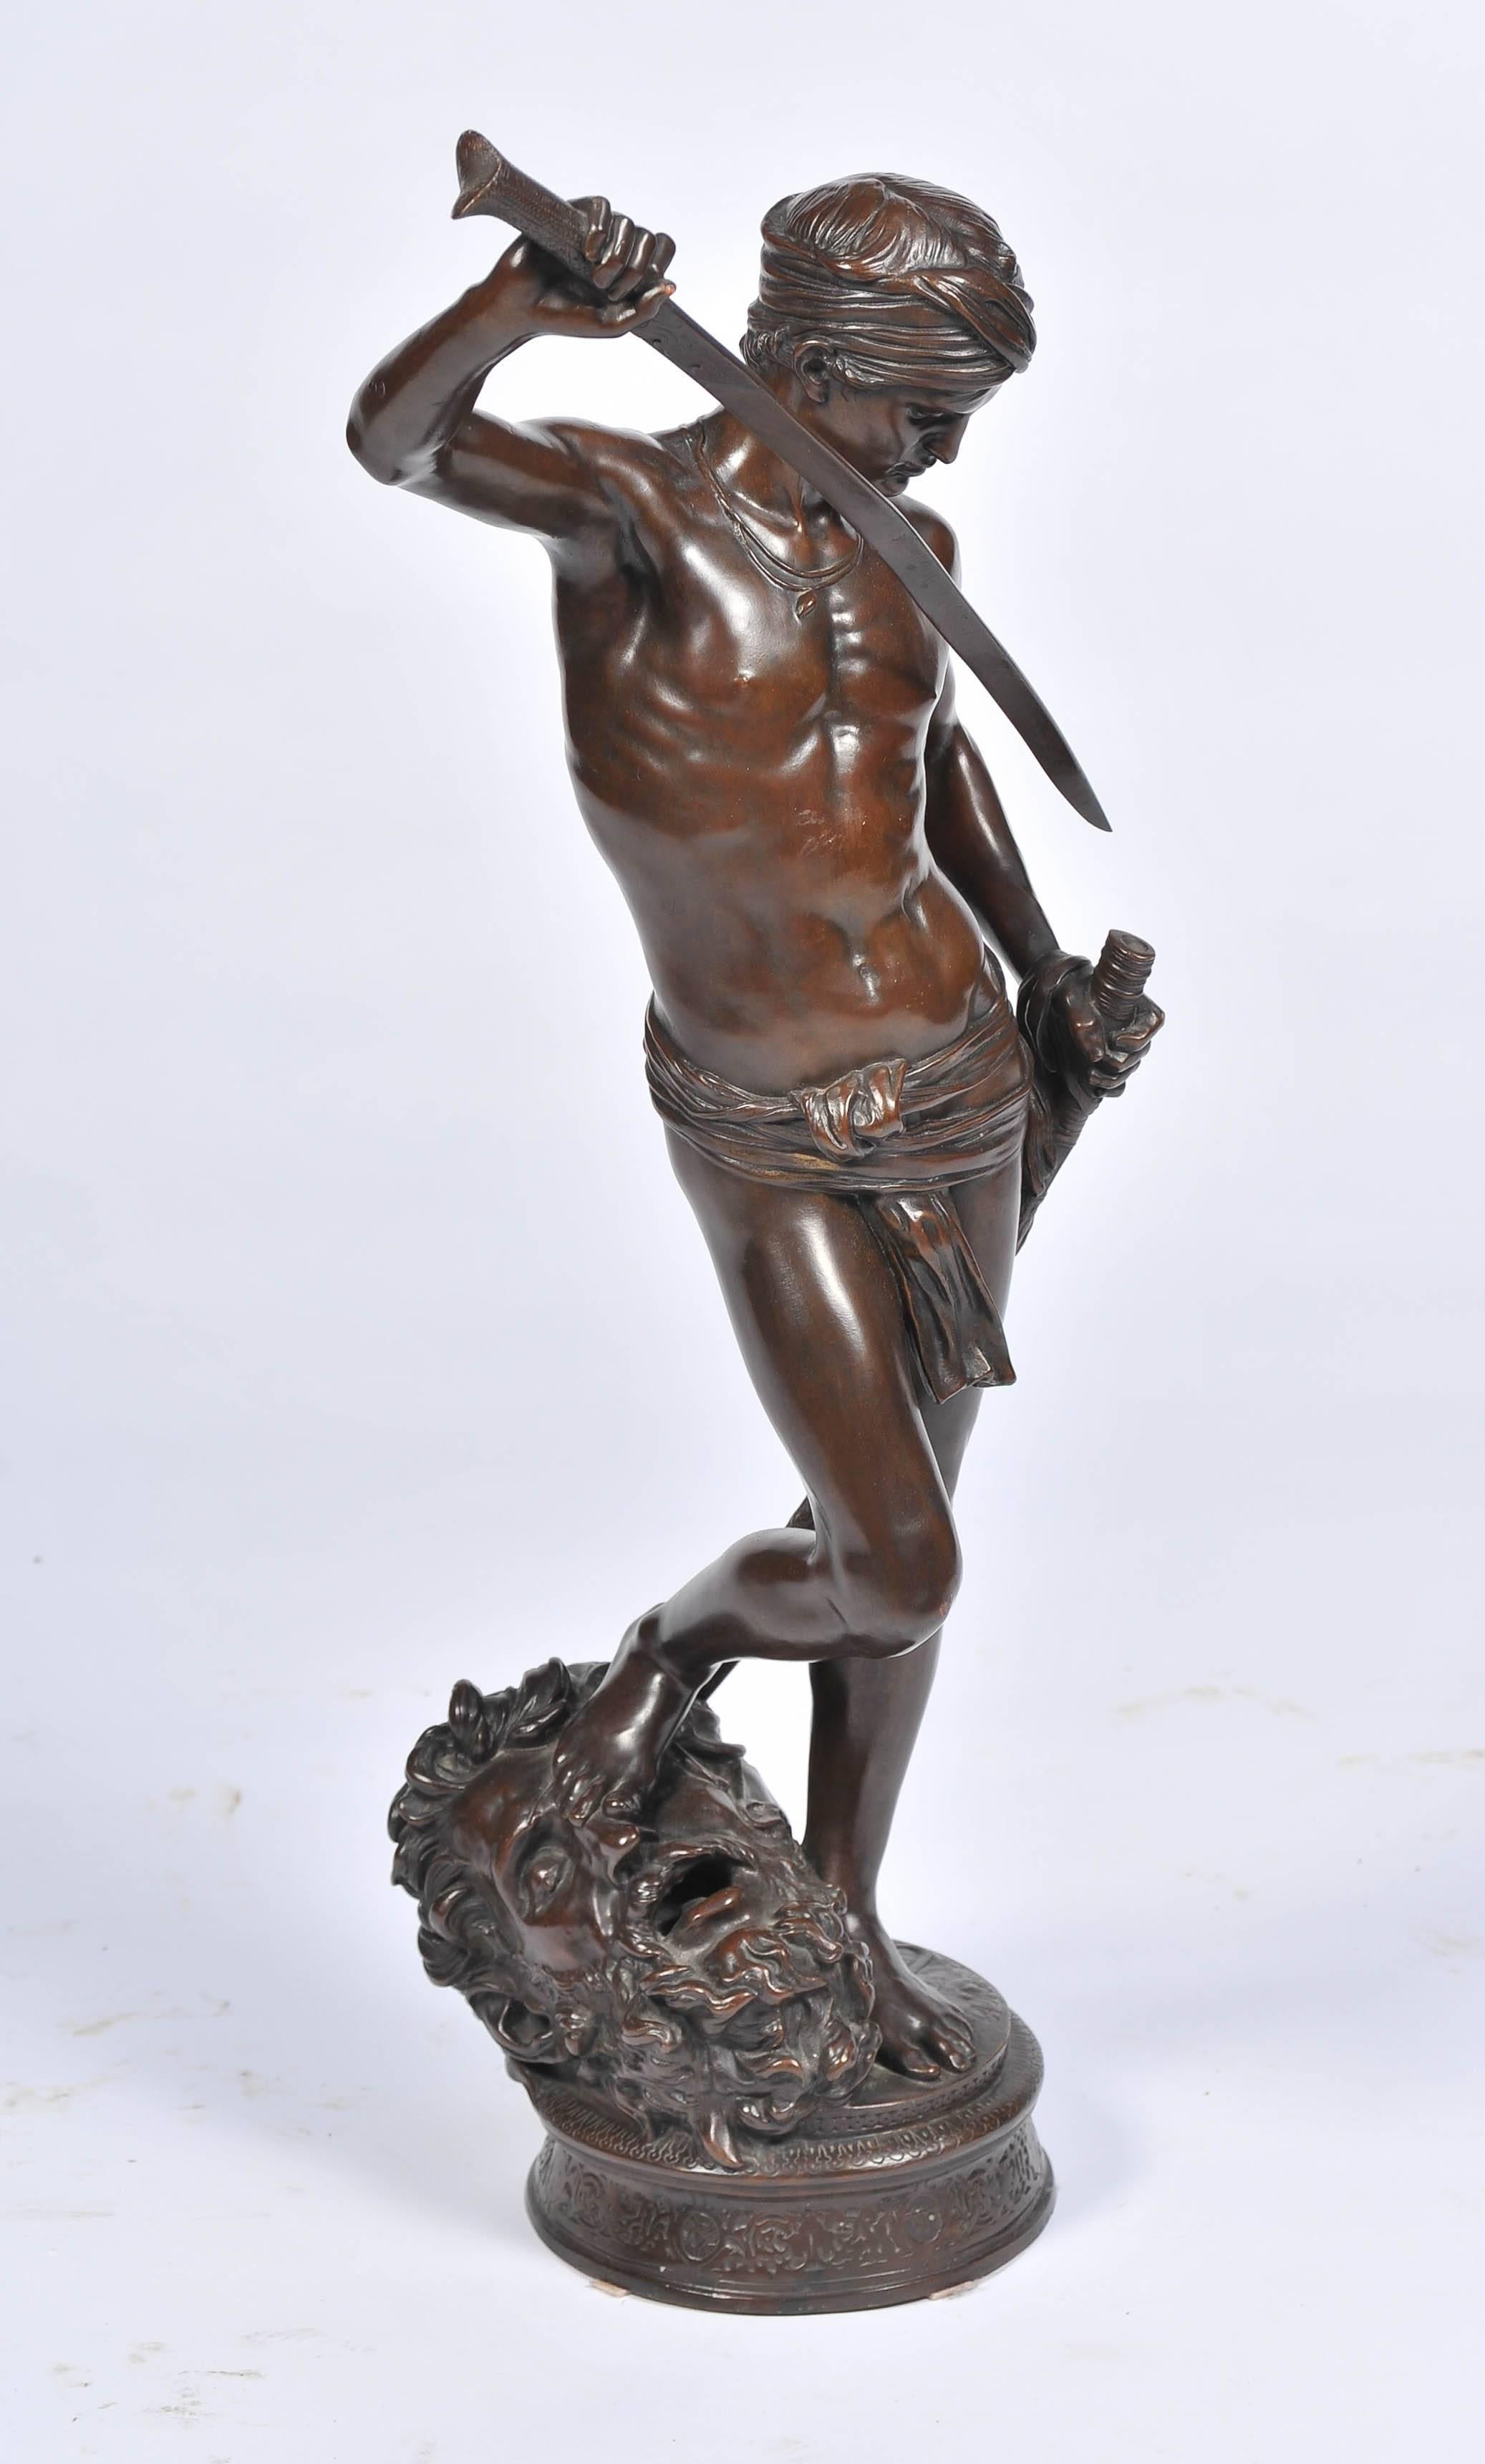 A very good quality bronze statue of David having defeated Goliath, standing over Goliath's head.
Jean-Antonin Mercie, (French 1845-1916) 